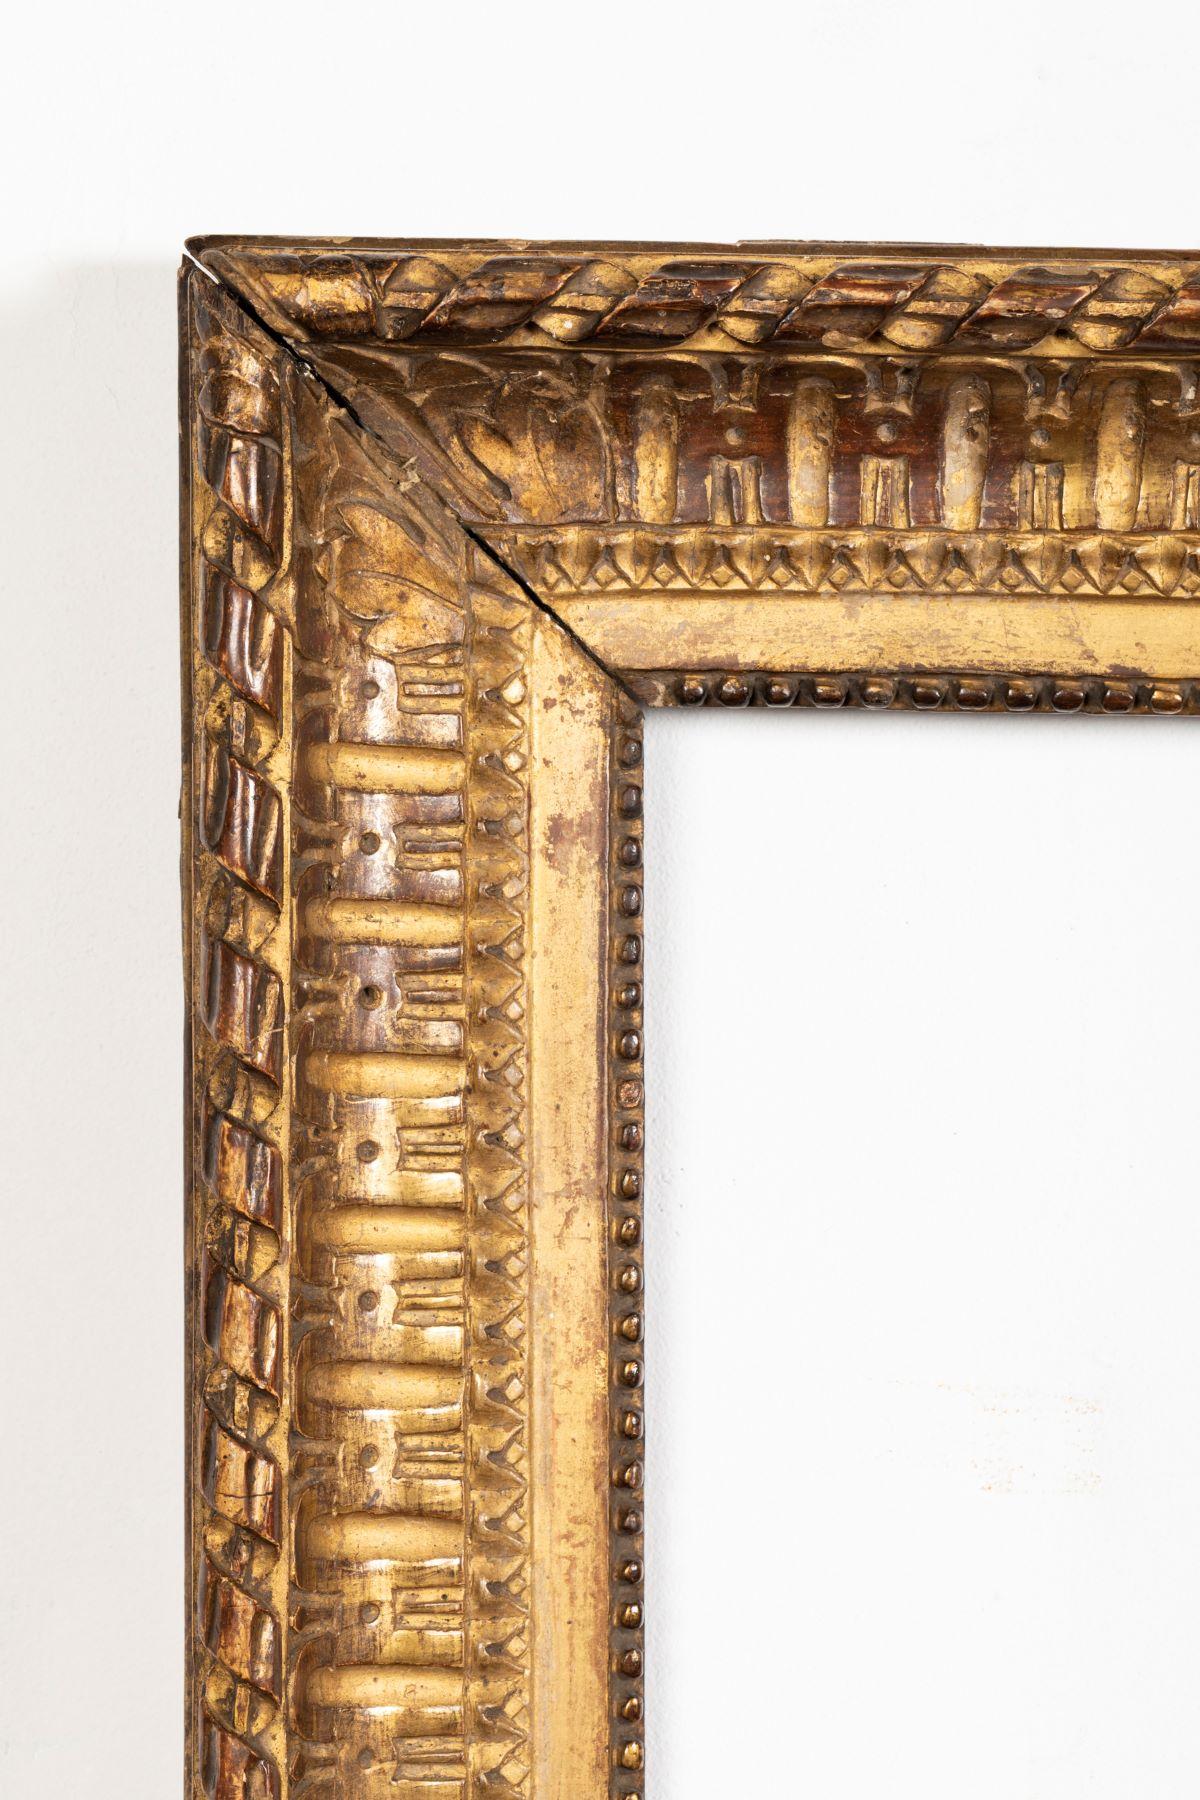 Rare Louis XVI period carved giltwood frame, mirror, France, late 18th century
Sight size: 27.5 cm x 21 cm
Overall size: 42.5 cm x 36 cm.